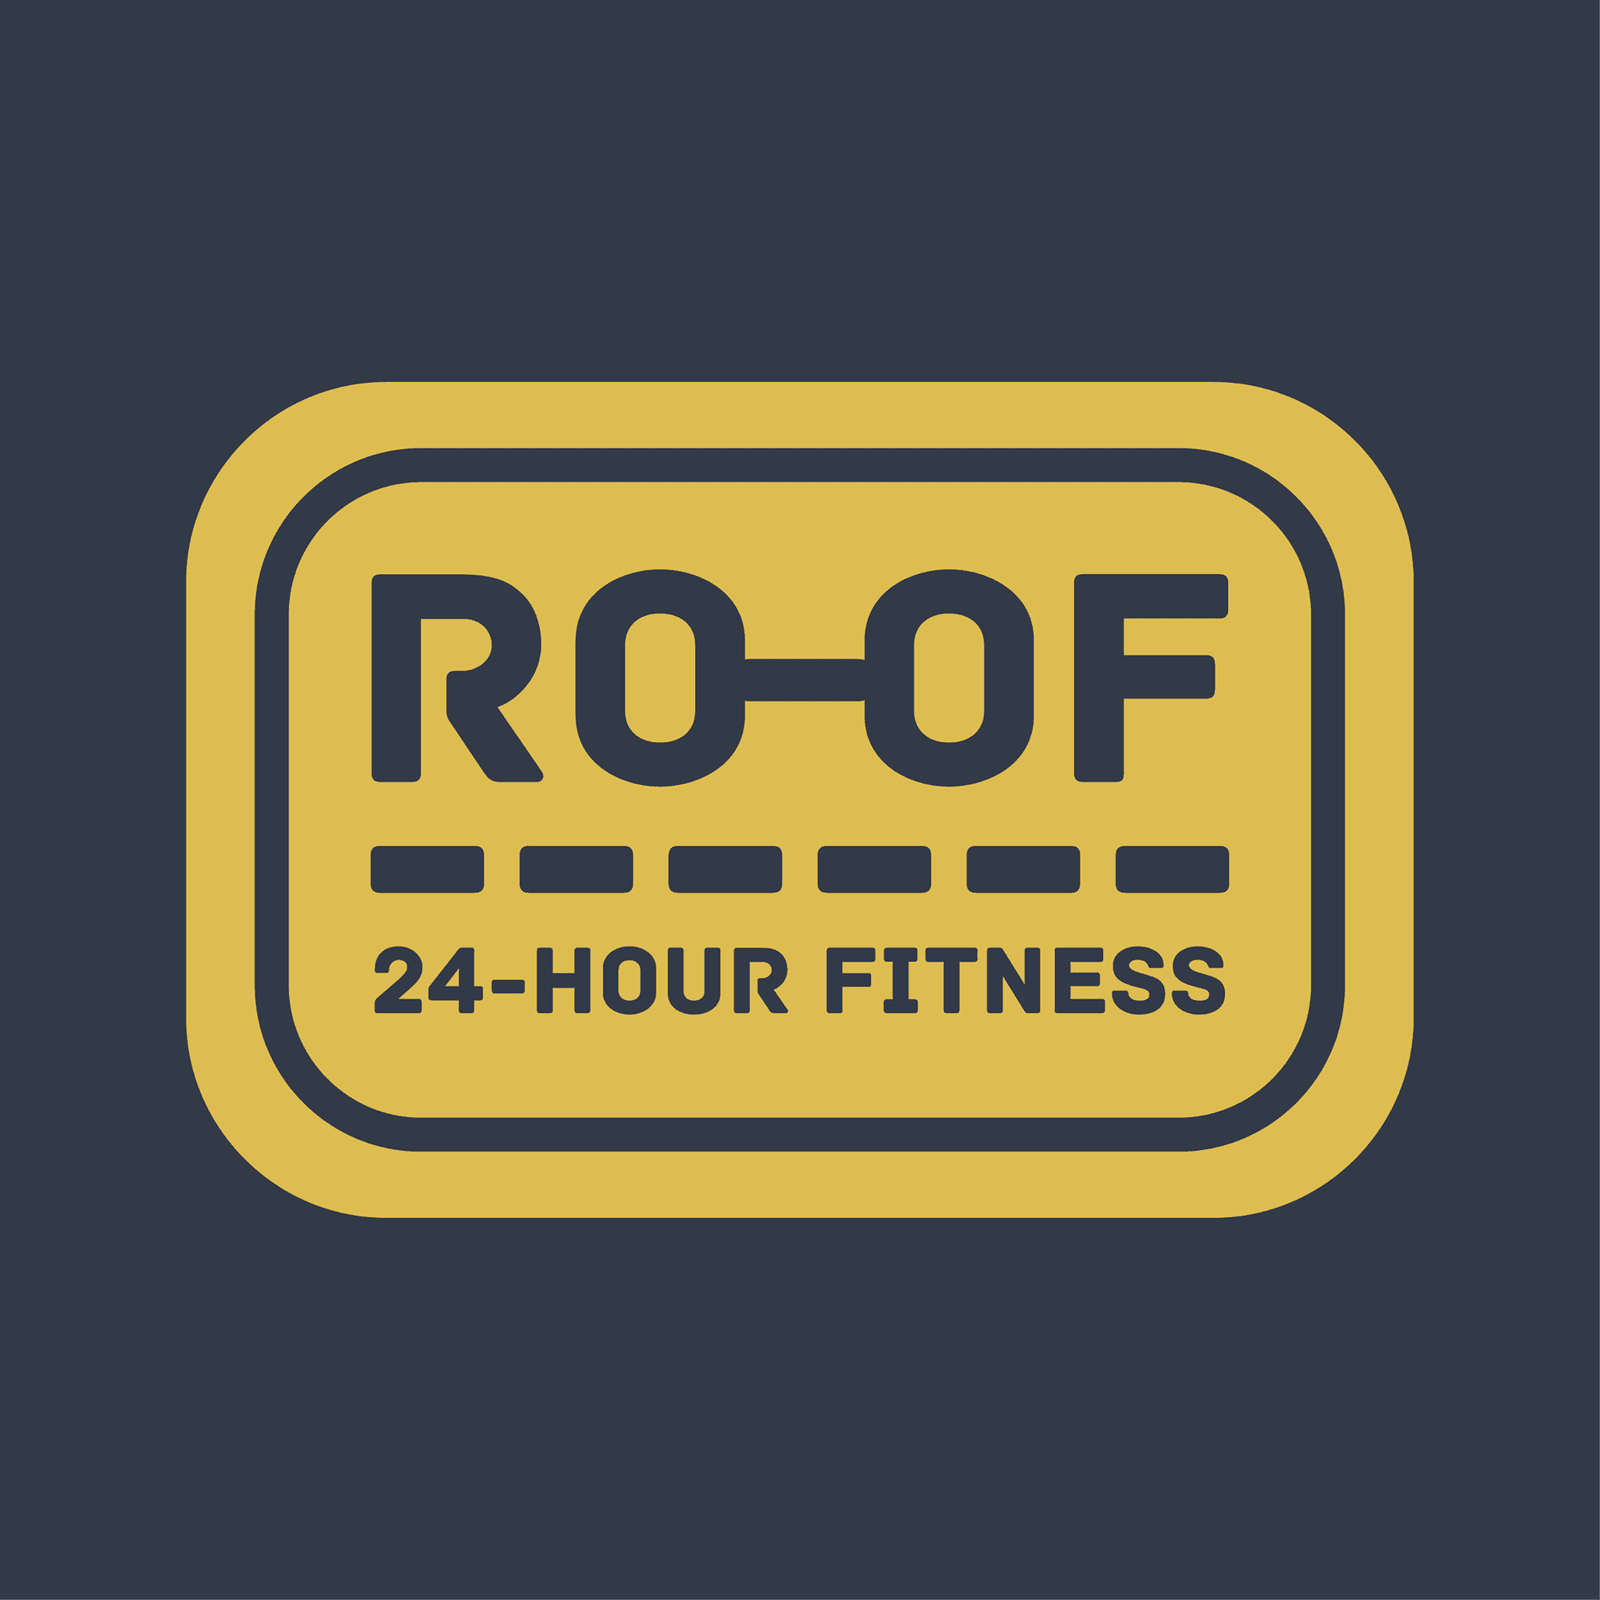 roof-24-hour-fitness